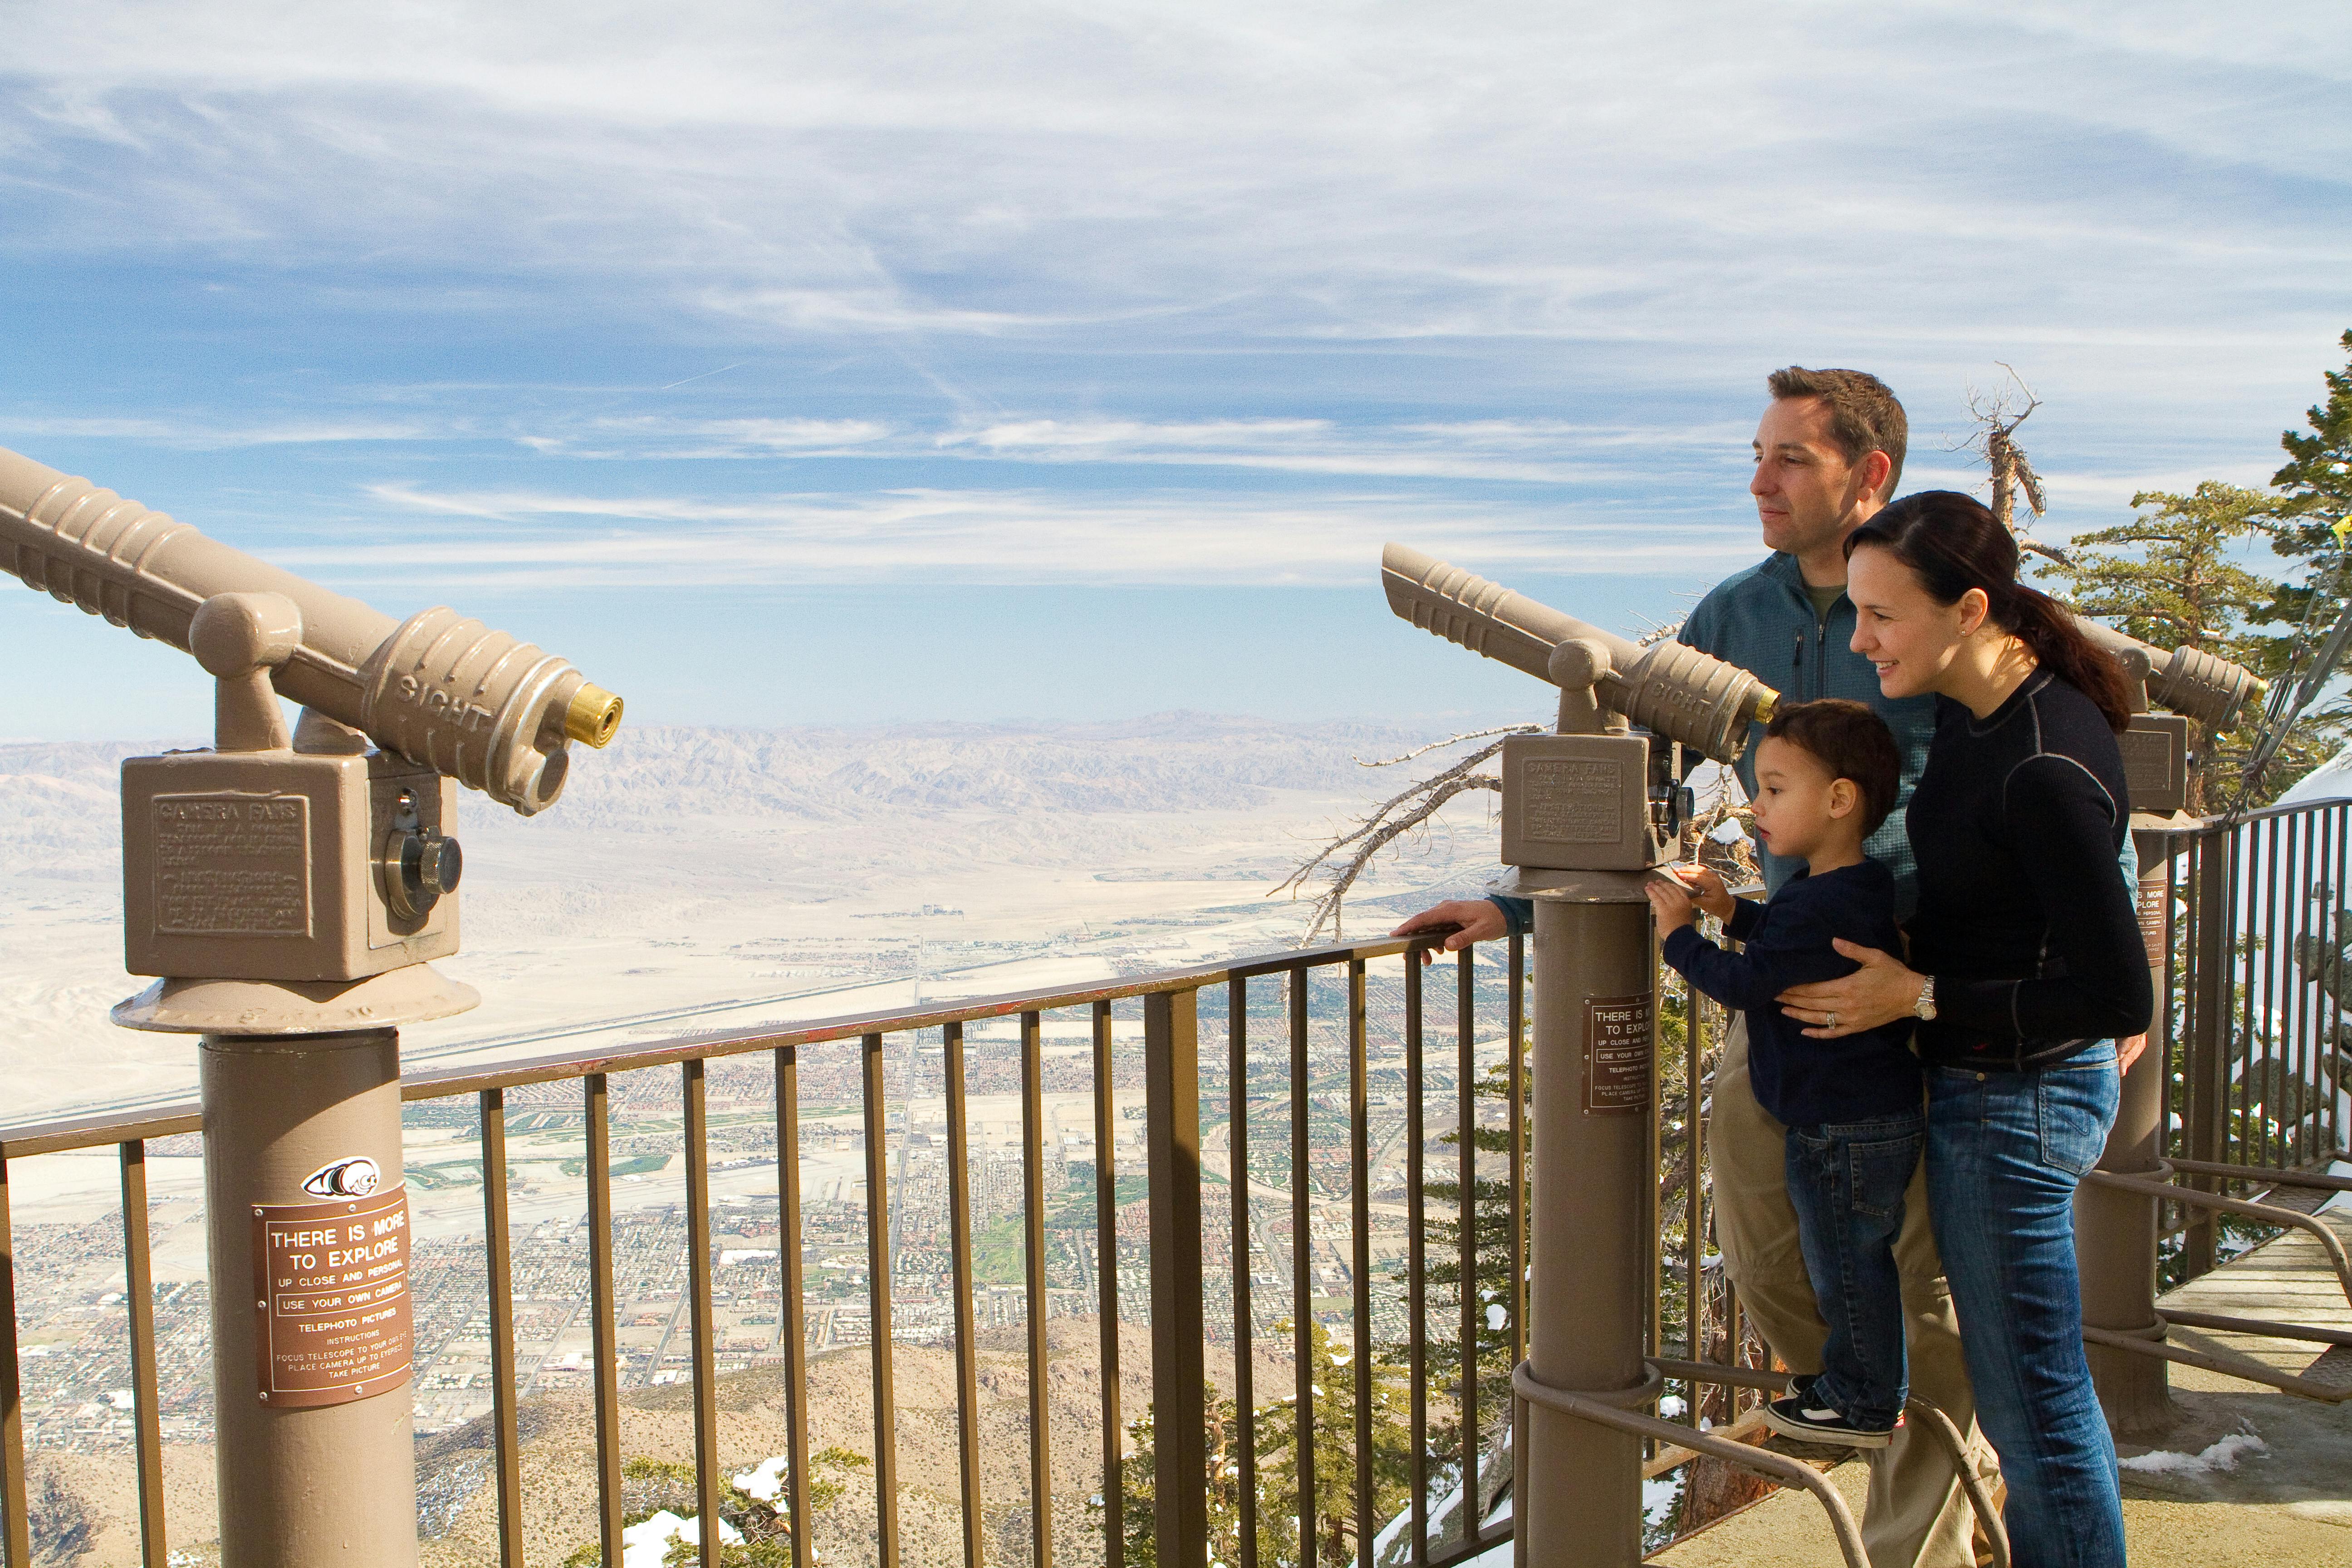 palm springs aerial tramway tickets